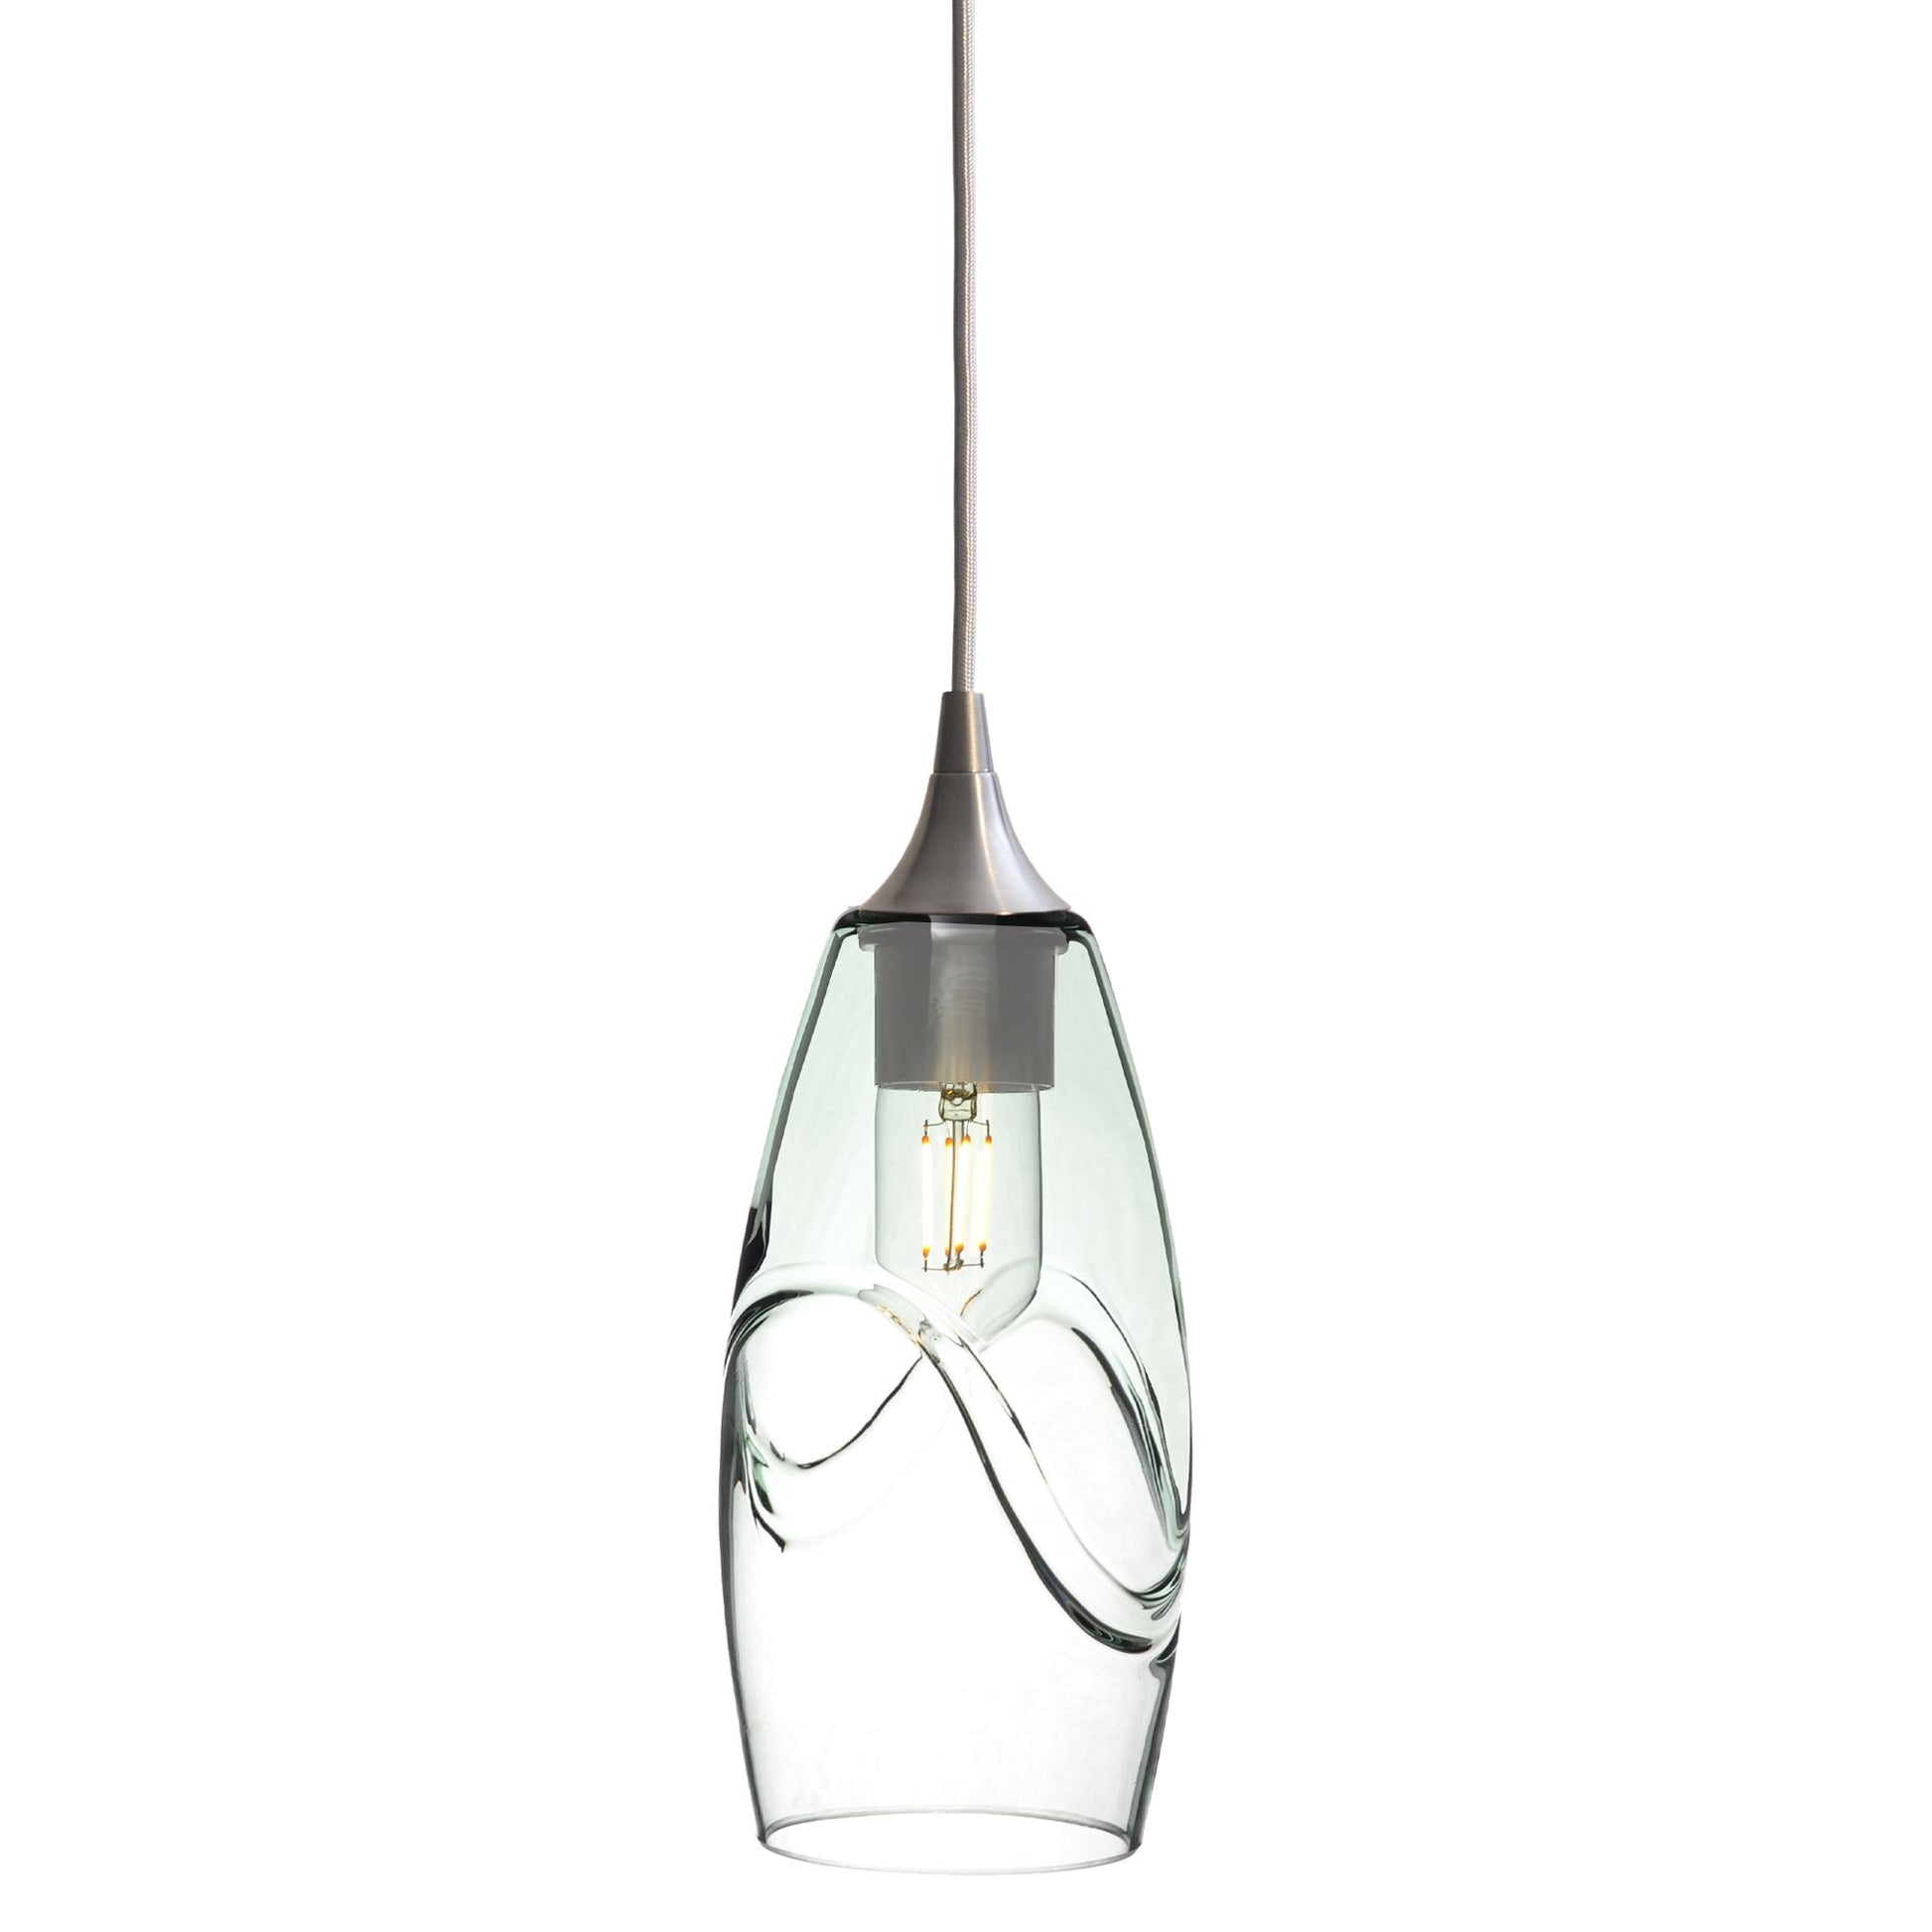 147 Swell: Single Pendant Light-Glass-Bicycle Glass Co - Hotshop-Eco Clear-Brushed Nickel-Bicycle Glass Co